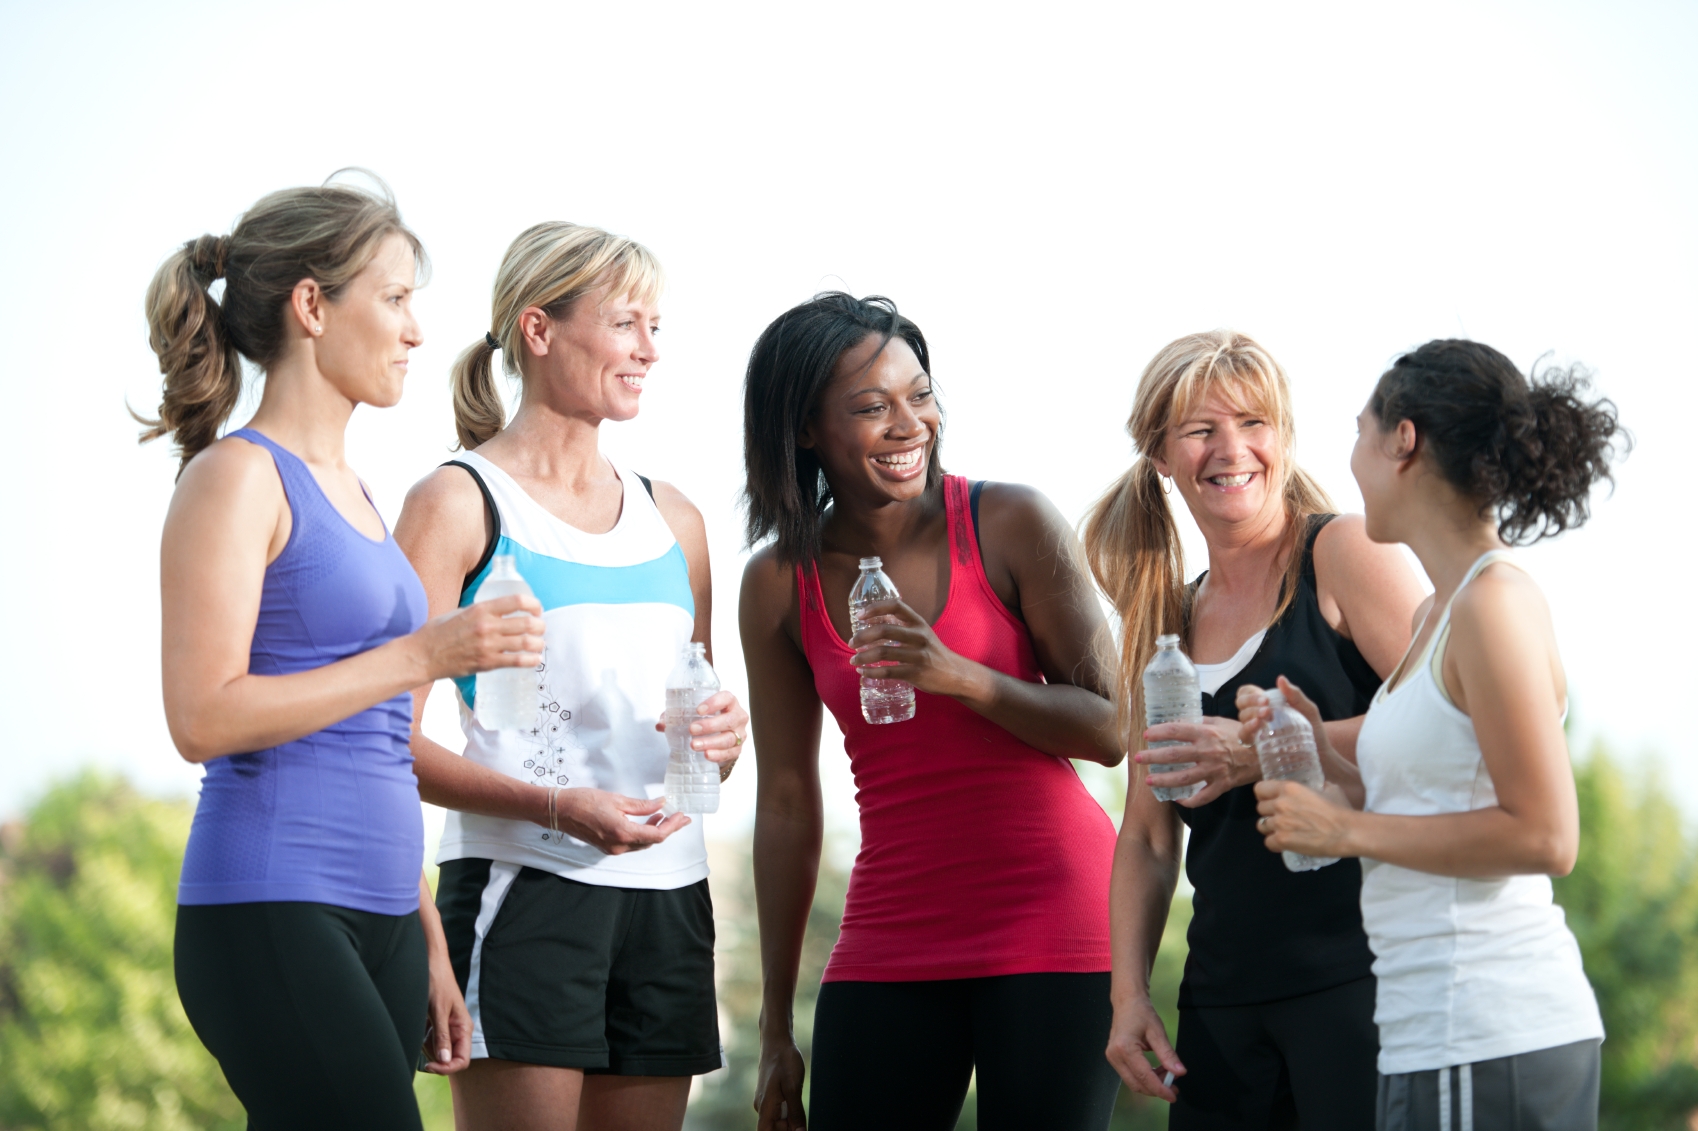 Closing the gender gap; more women are playing sport and getting active.